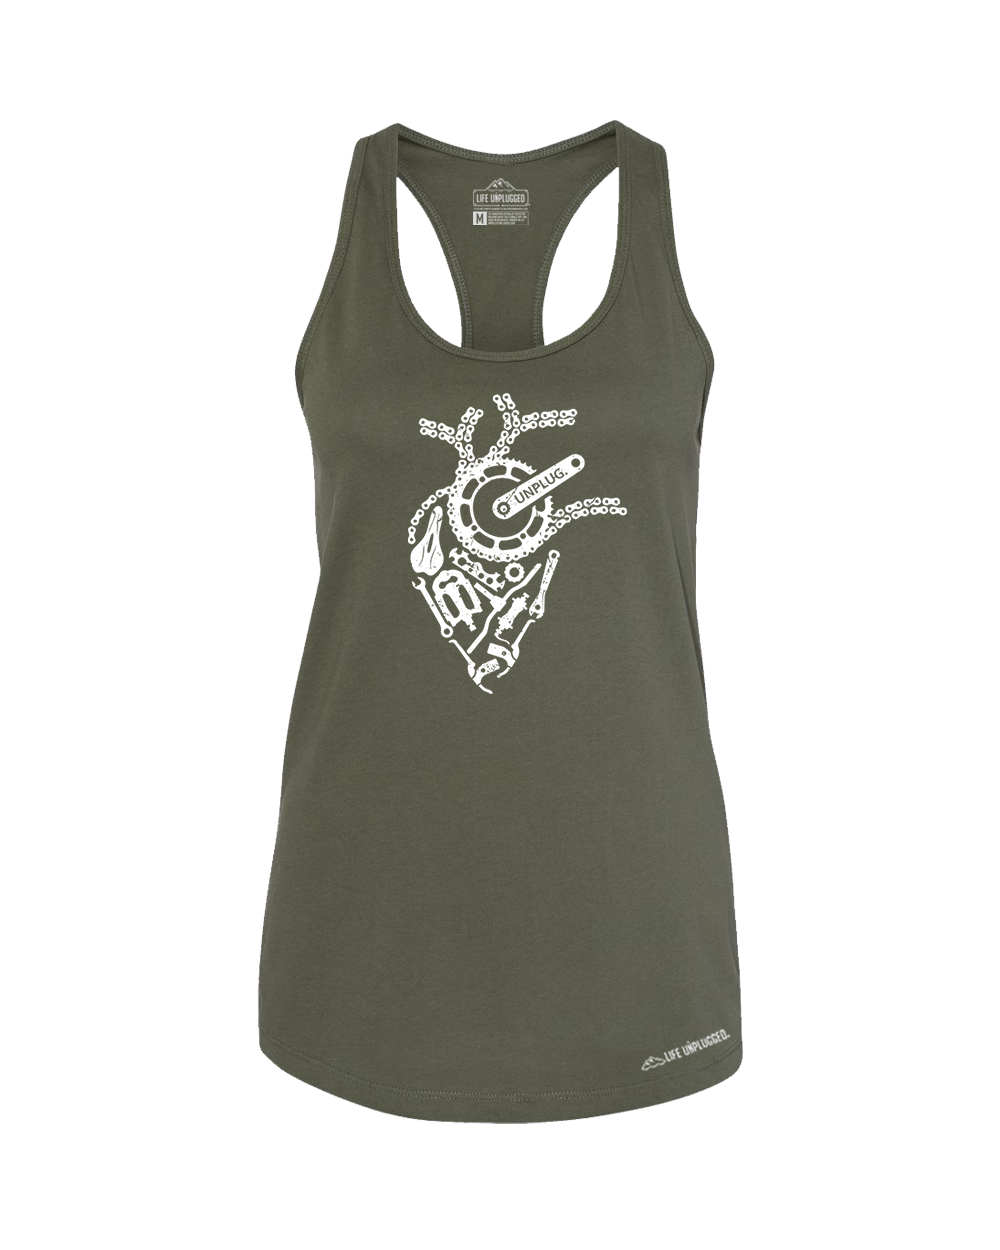 Anatomical Heart (Bicycle Parts) Premium Women's Relaxed Fit Racerback Tank Top - Life Unplugged